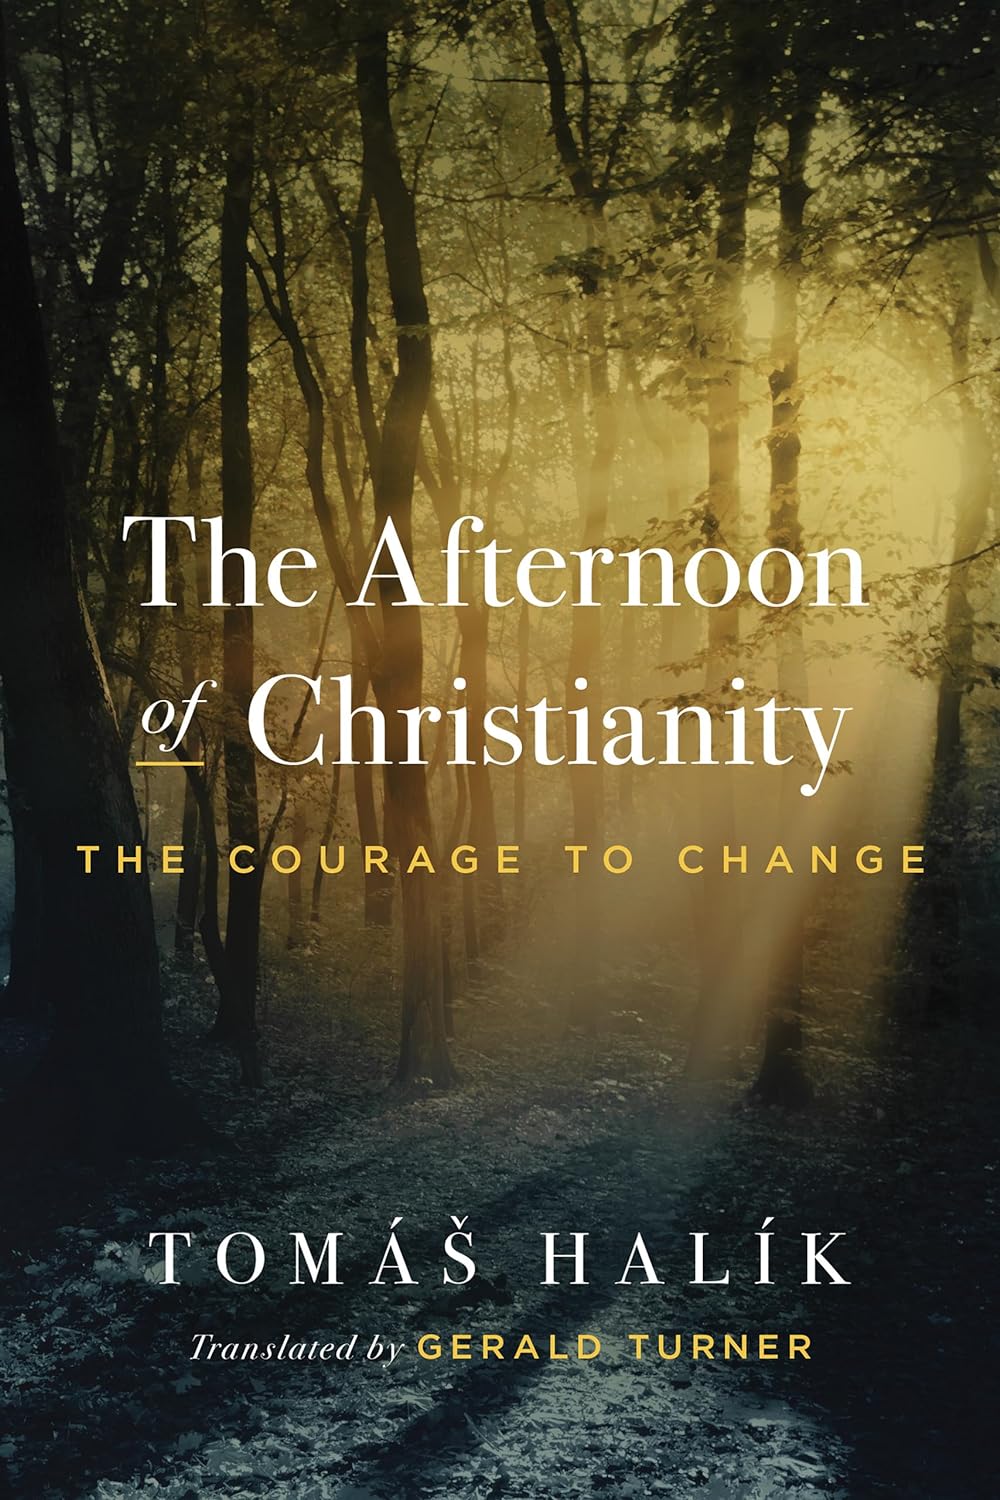 "Afternoon of Christianity" book cover